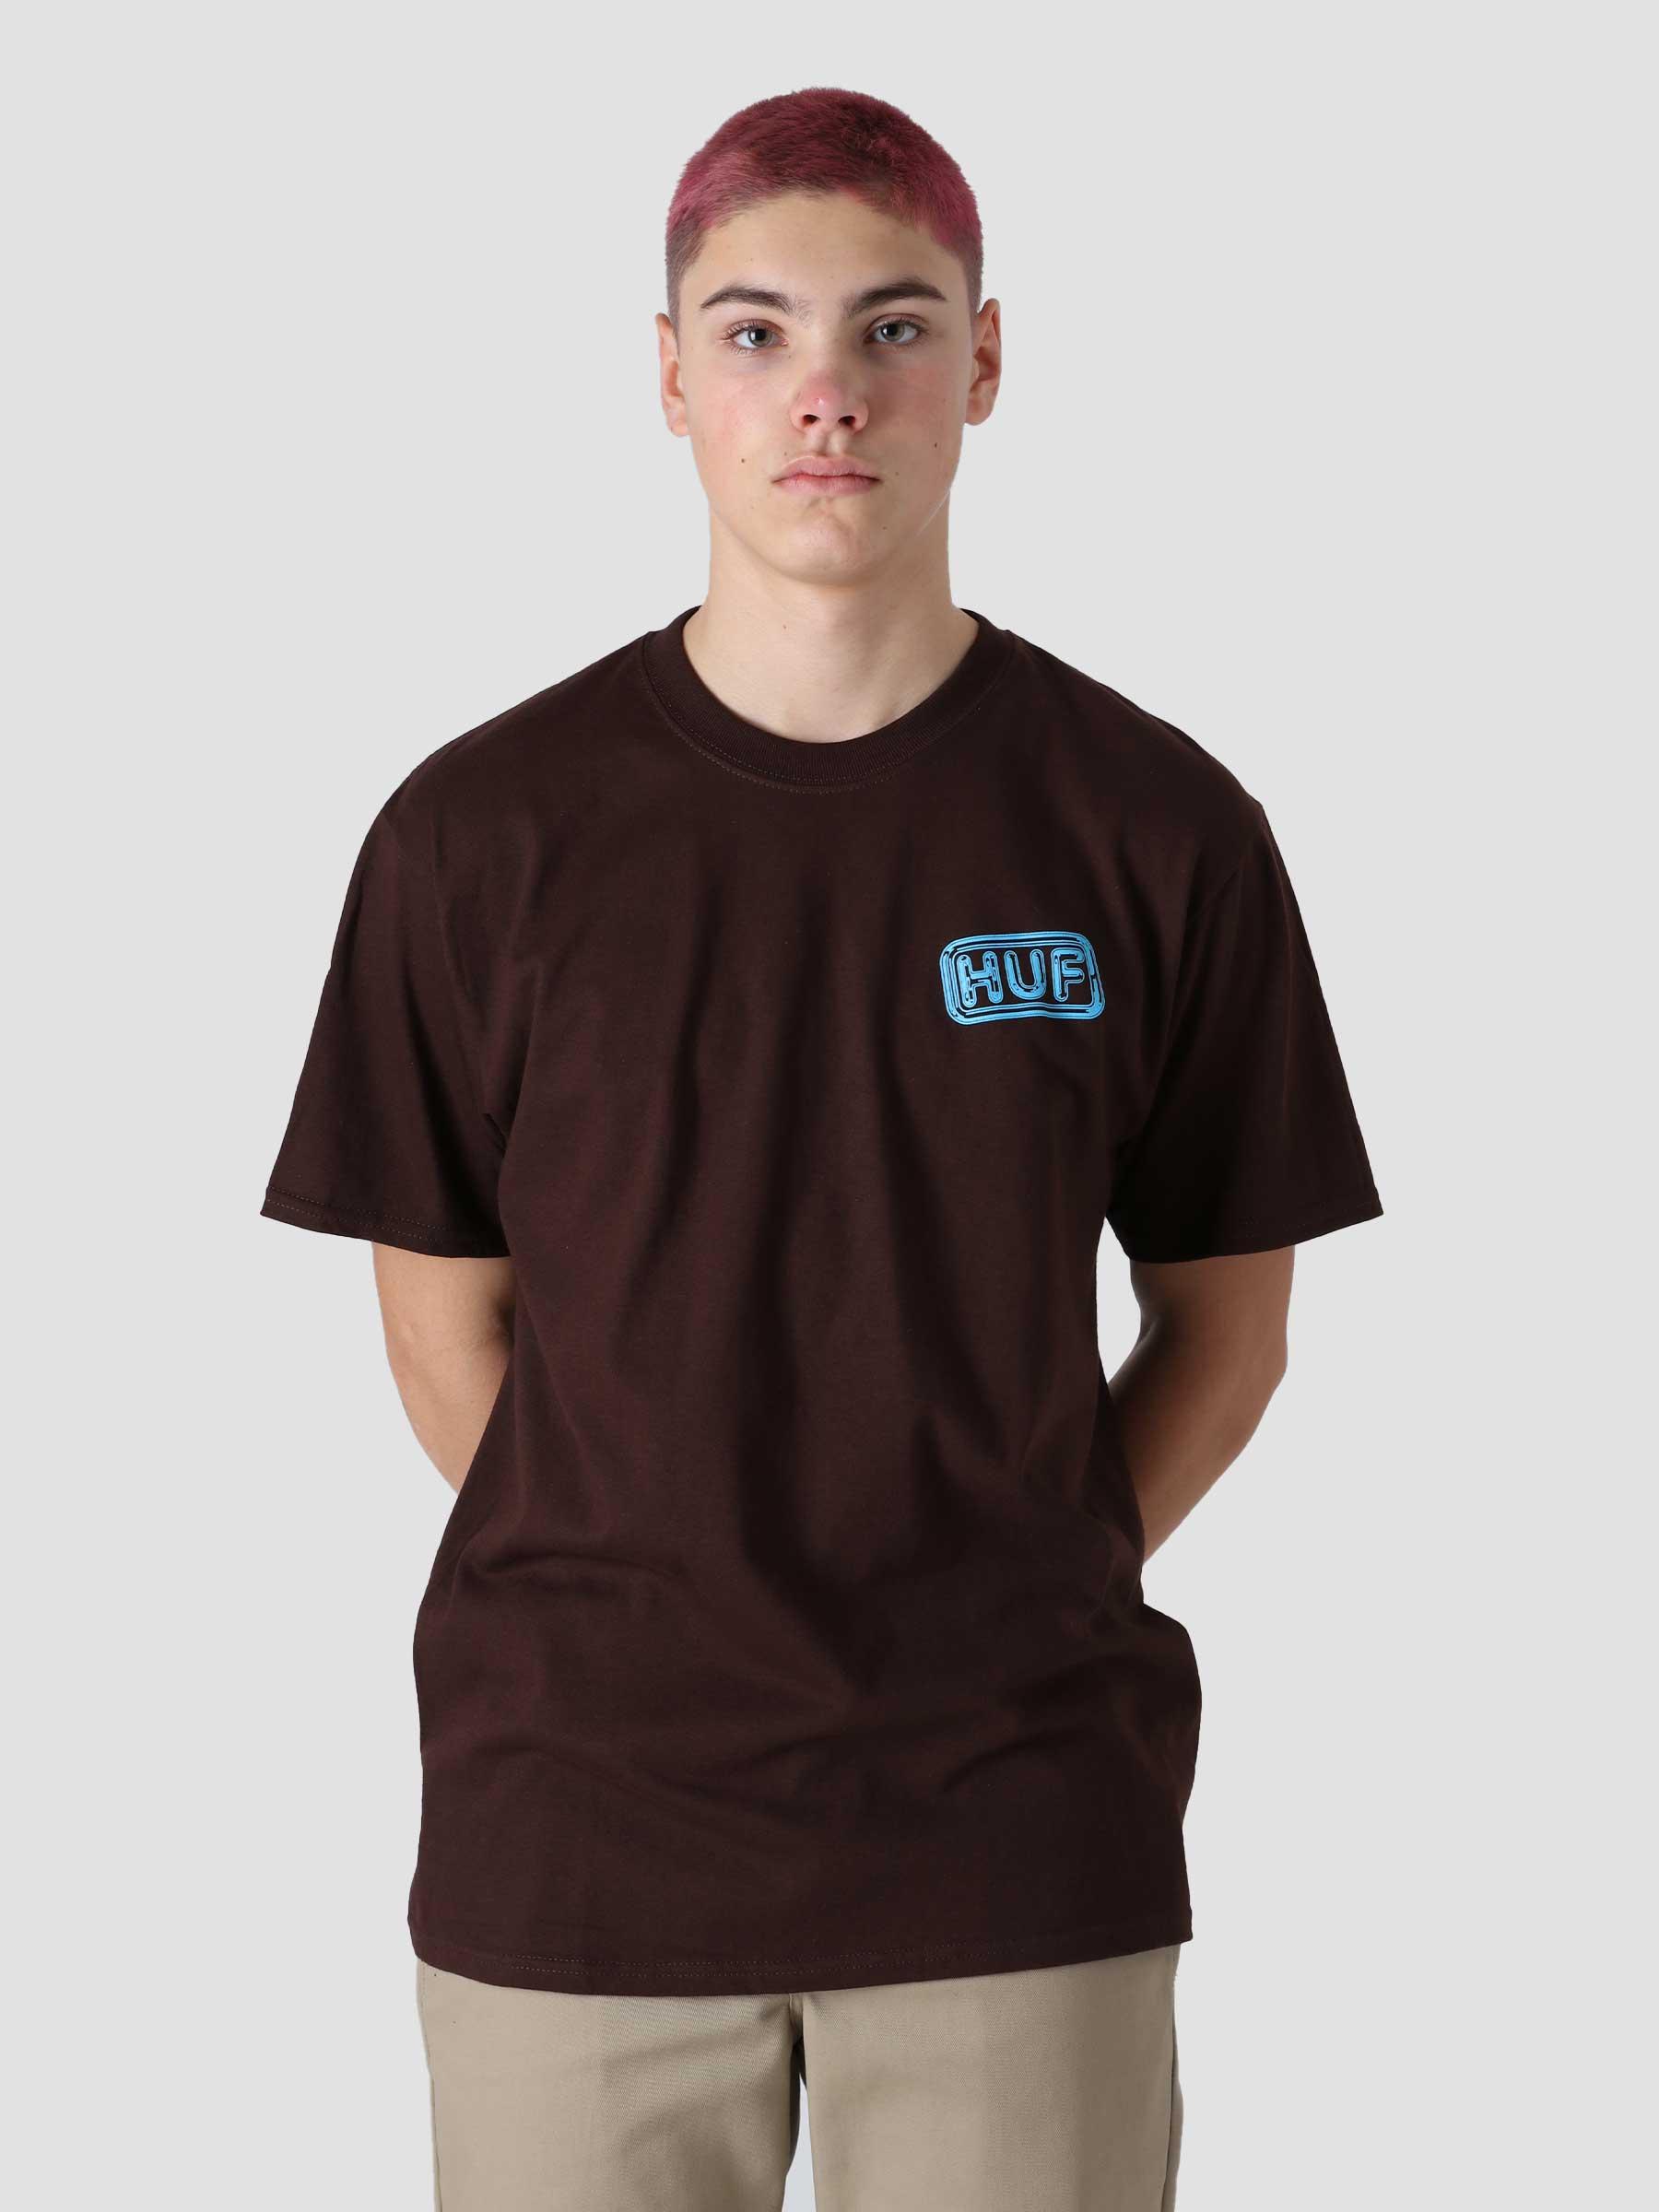 Common H S/S T-Shirt Chocolate Brown TS01571